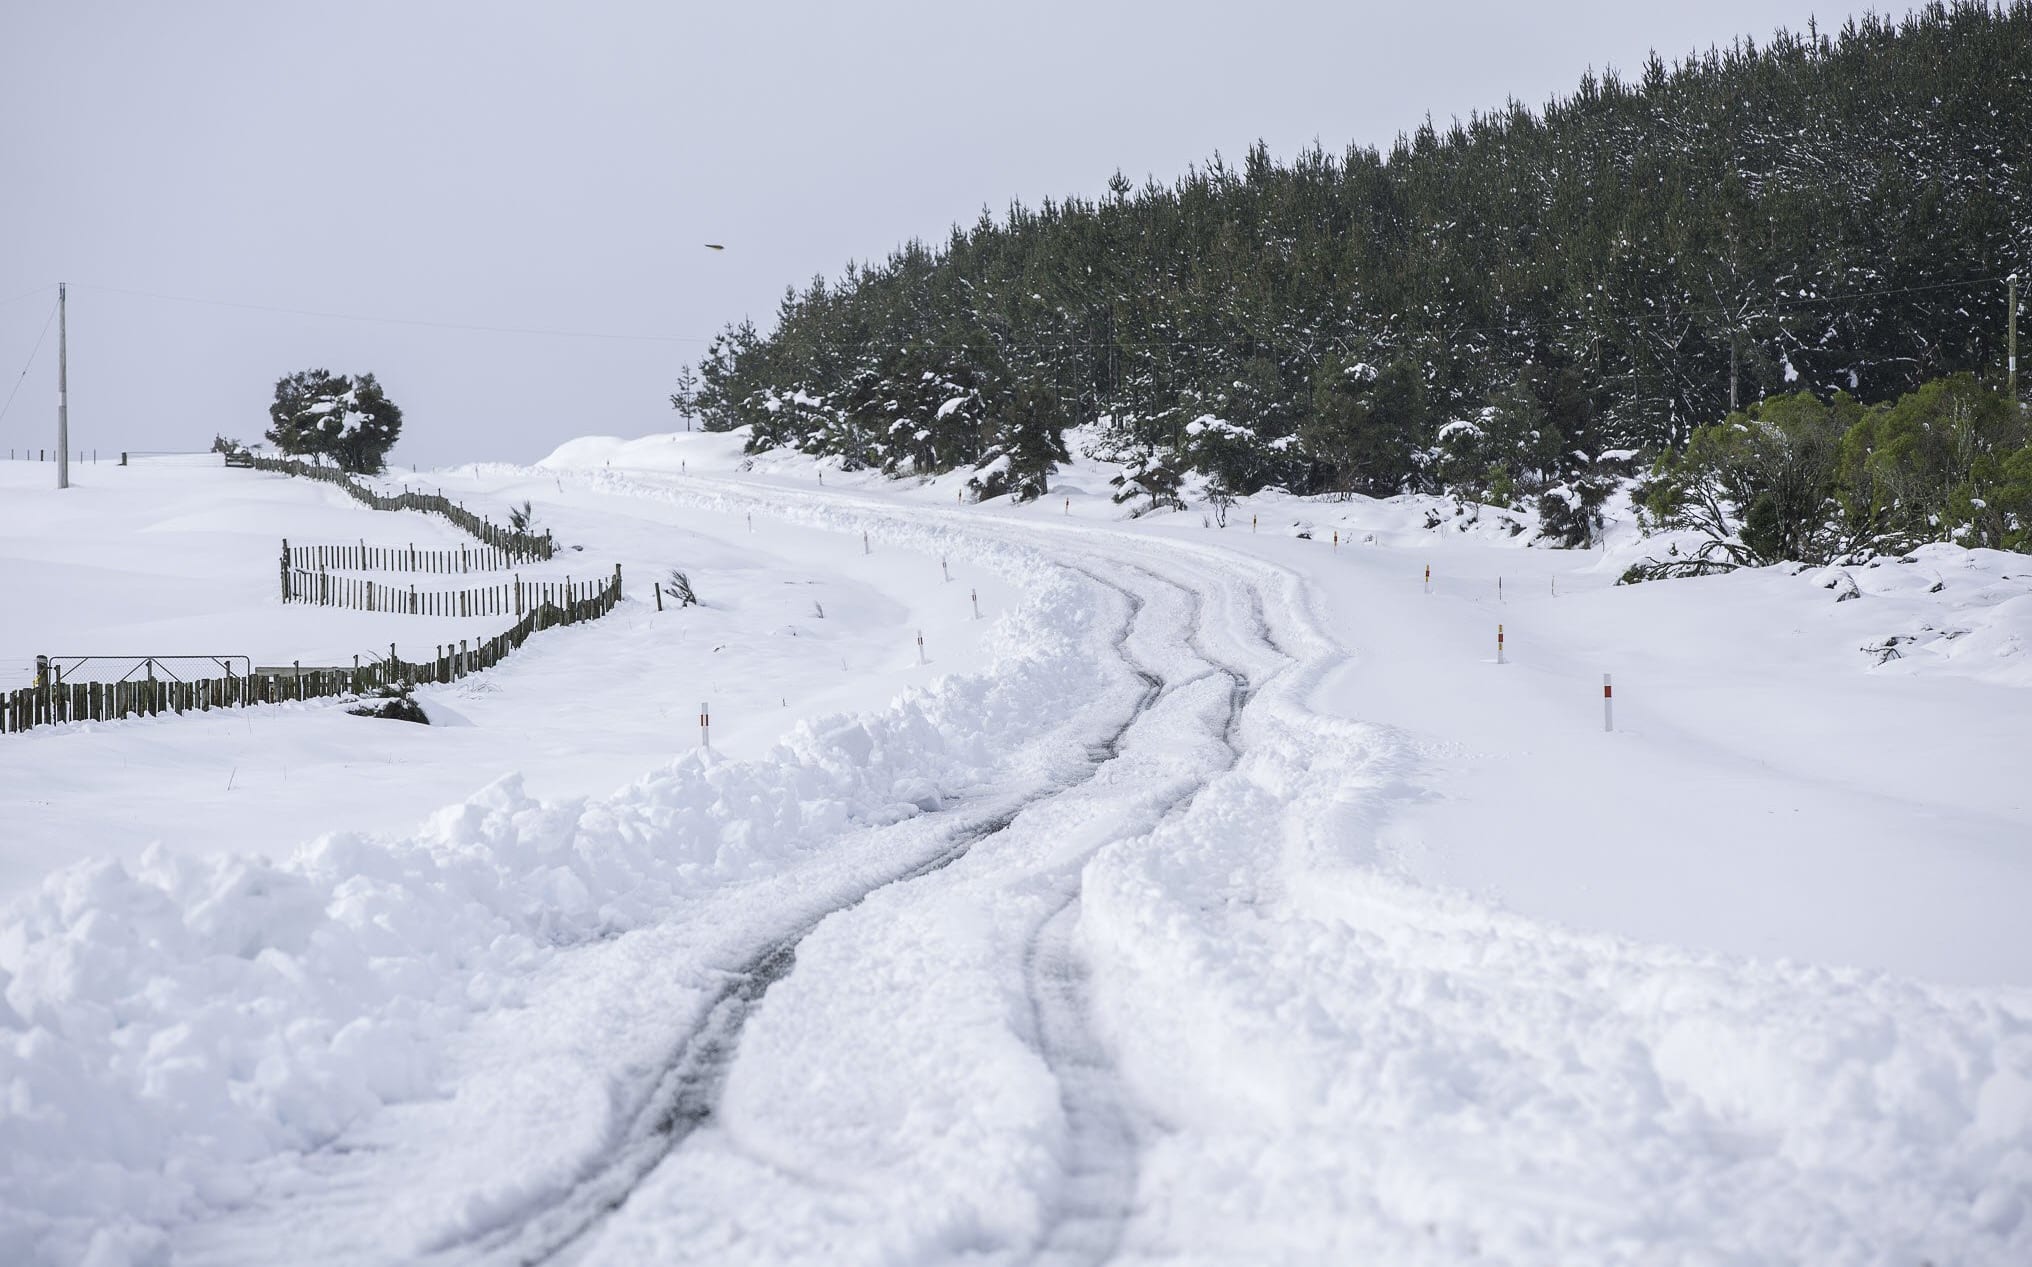 Up to 60cm of snow fell on the Napier-Taupo Road (State Highway 5) over the weekend.